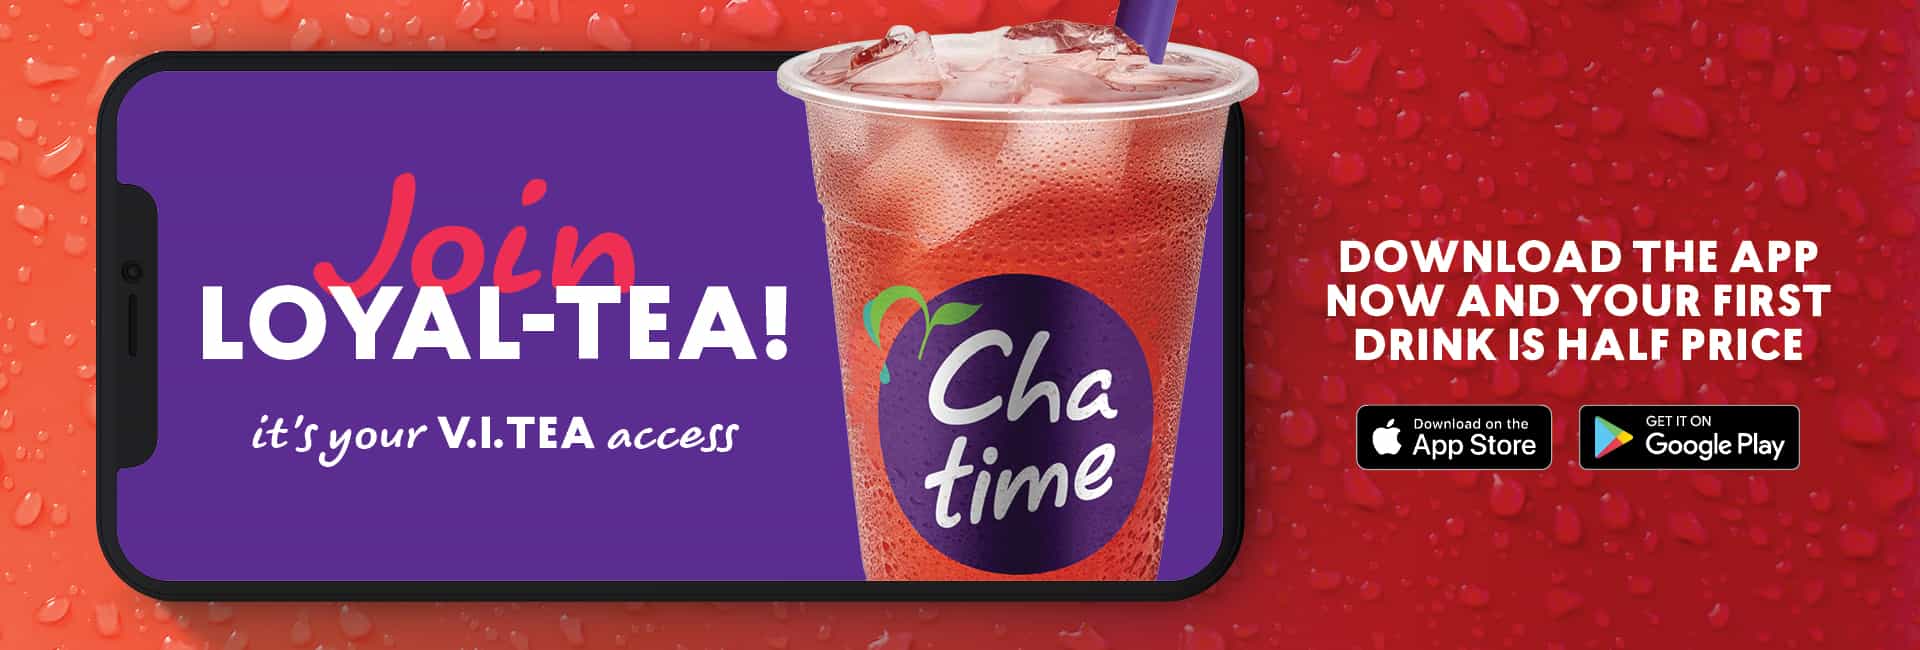 50% OFF on your first drink when you download the Chatime app